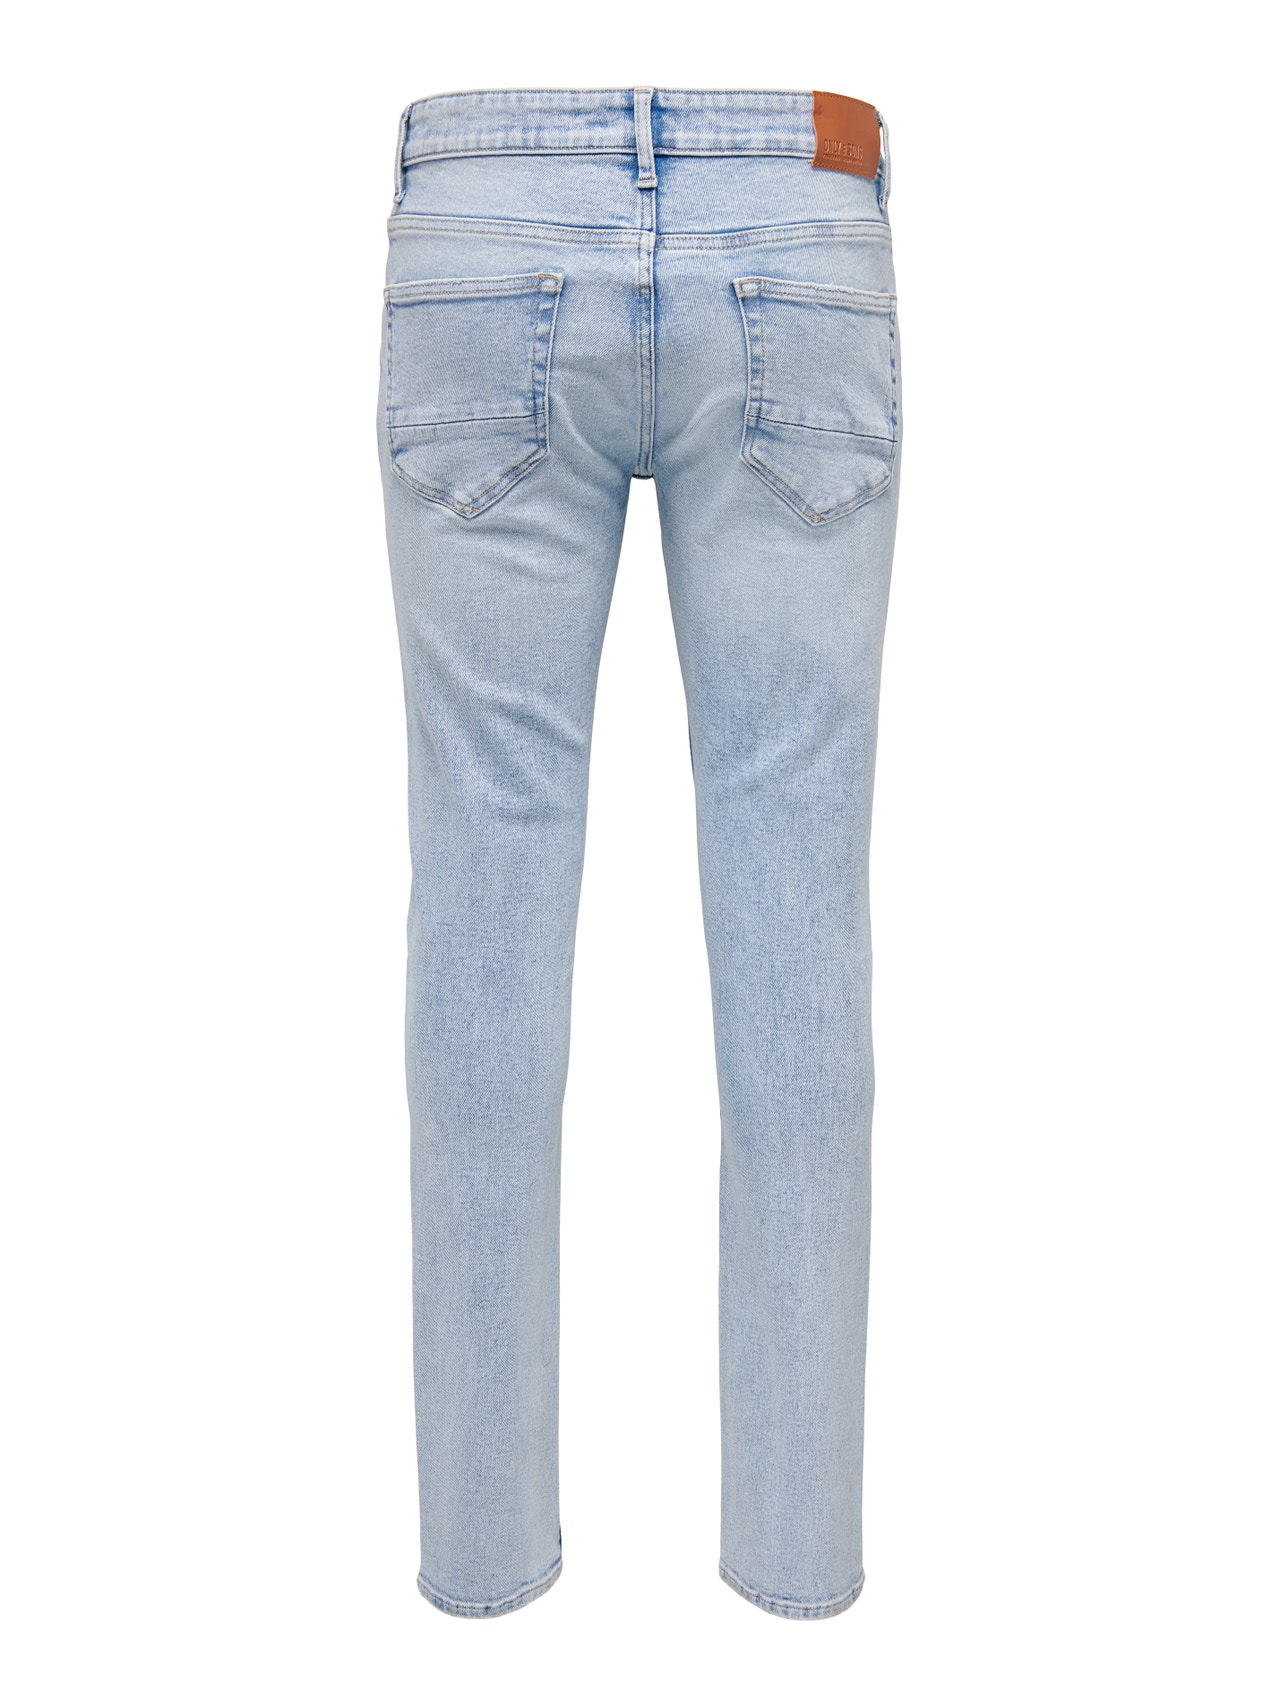 ONLY & SONS Jeans Slim Fit Taille moyenne Ourlé destroy -Blue Denim - 22023922